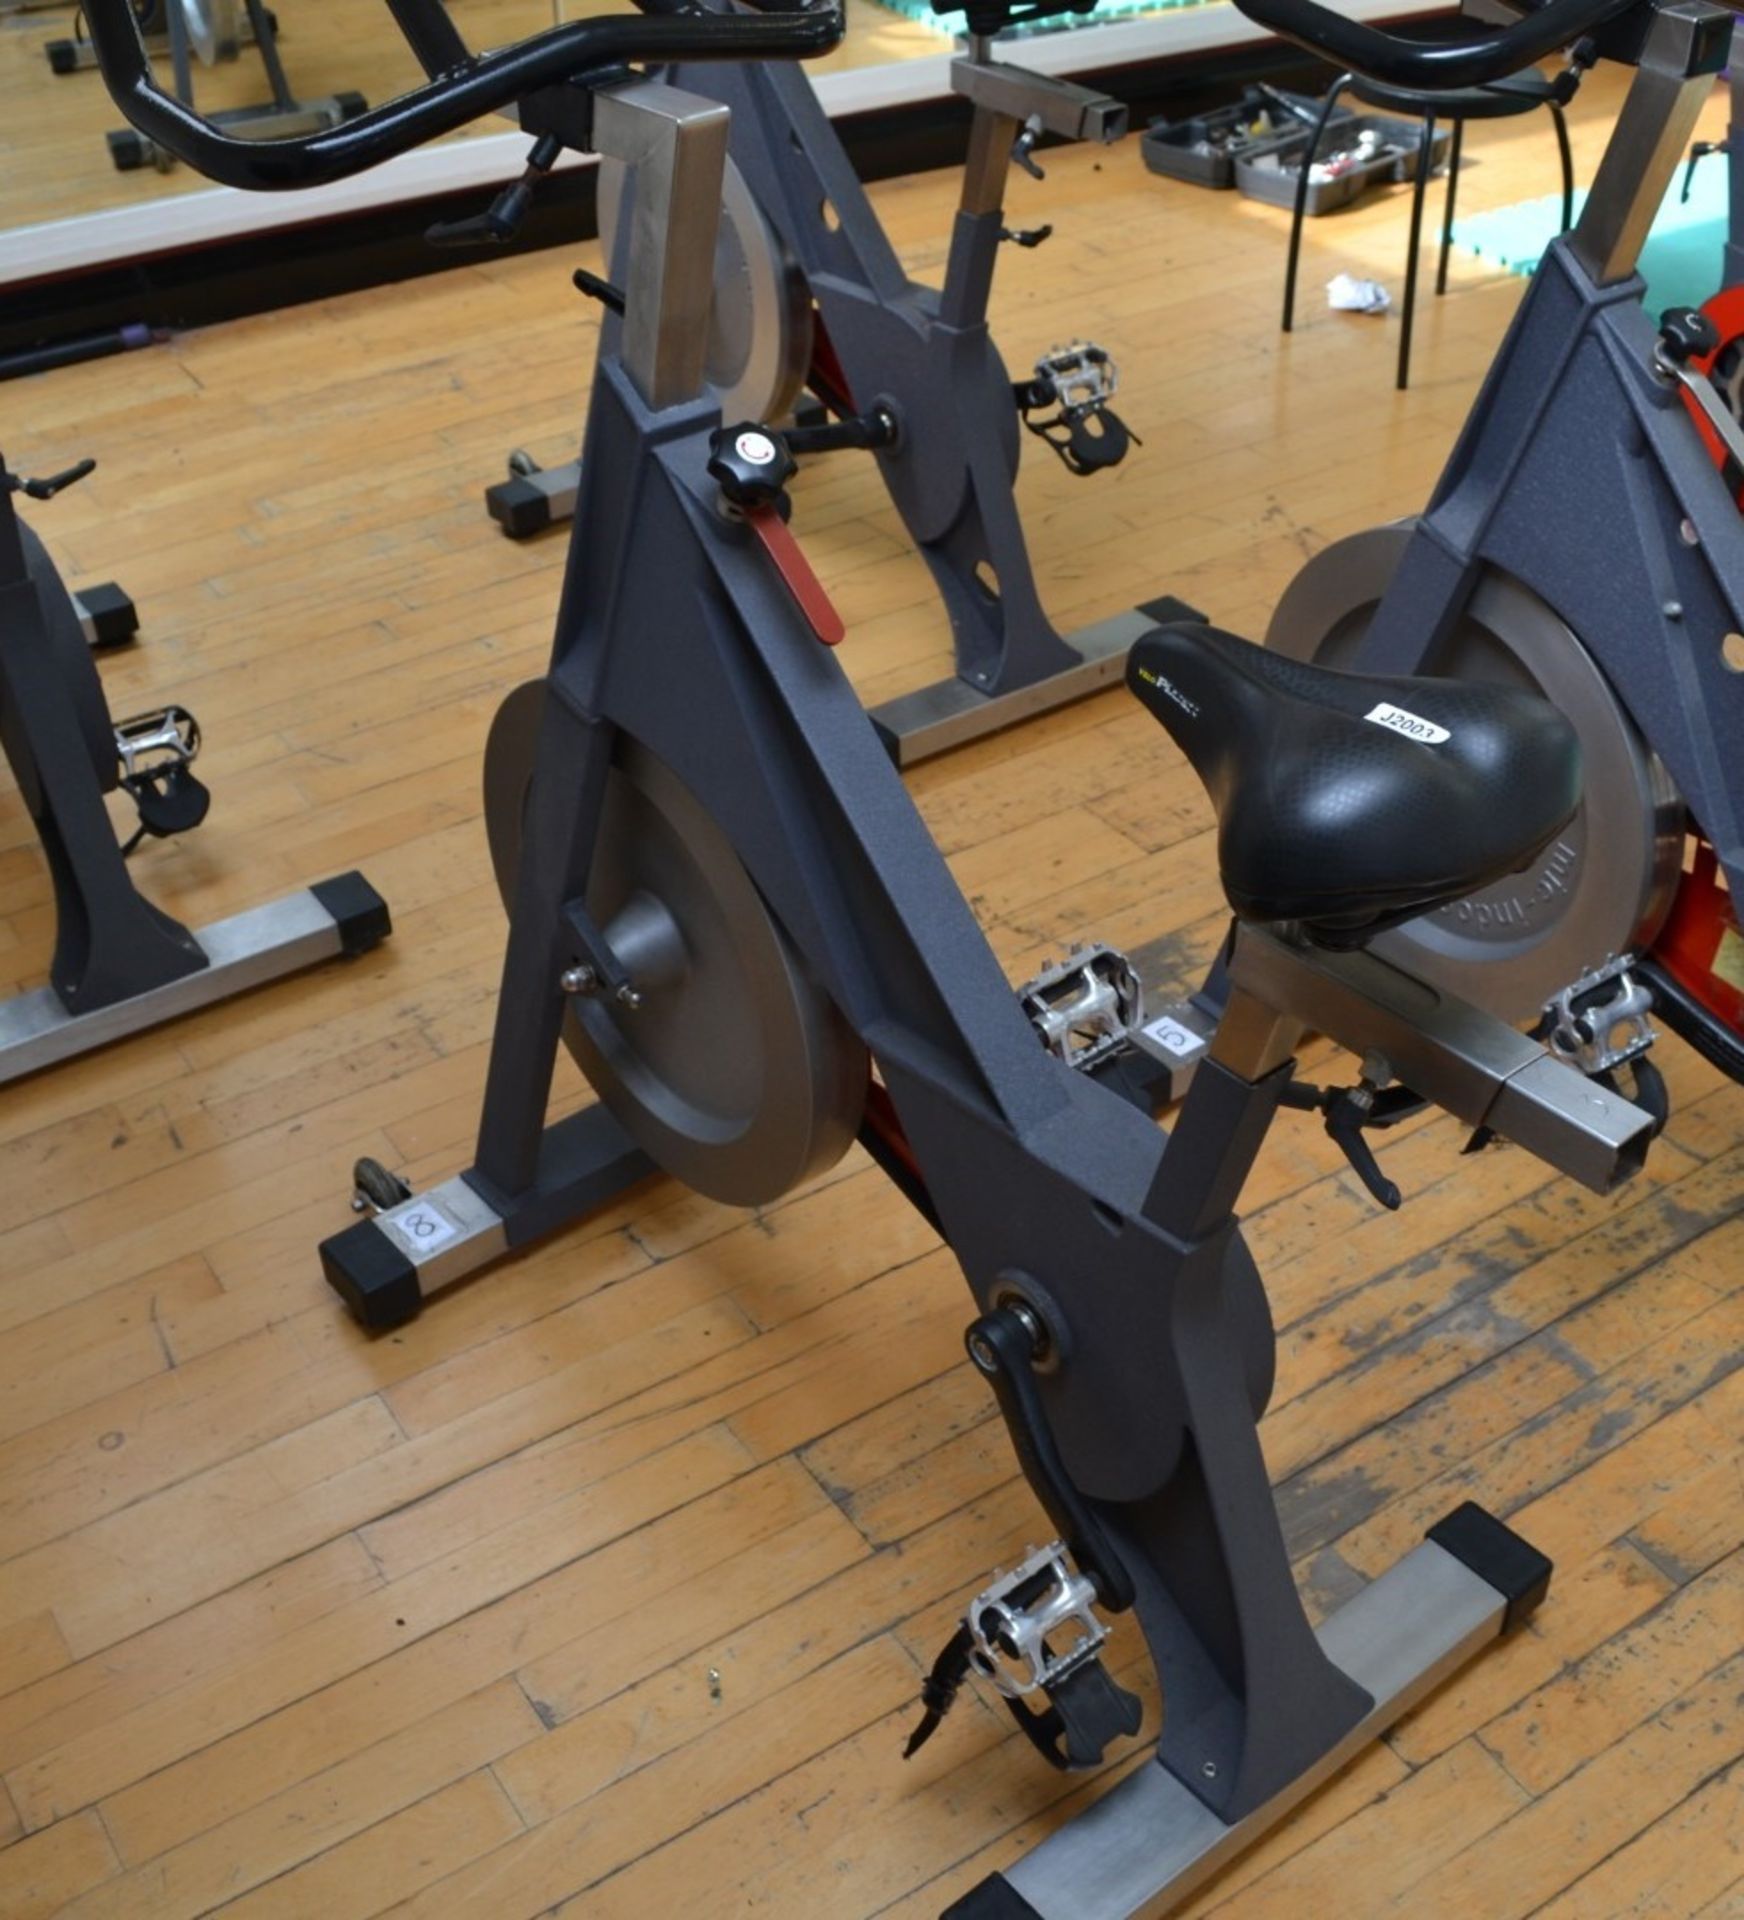 1 x TRUE Indoor Cycling Spin Bike With Adjustable Bars and Seat - Dimensions: L100cm x H100cm - Image 2 of 2